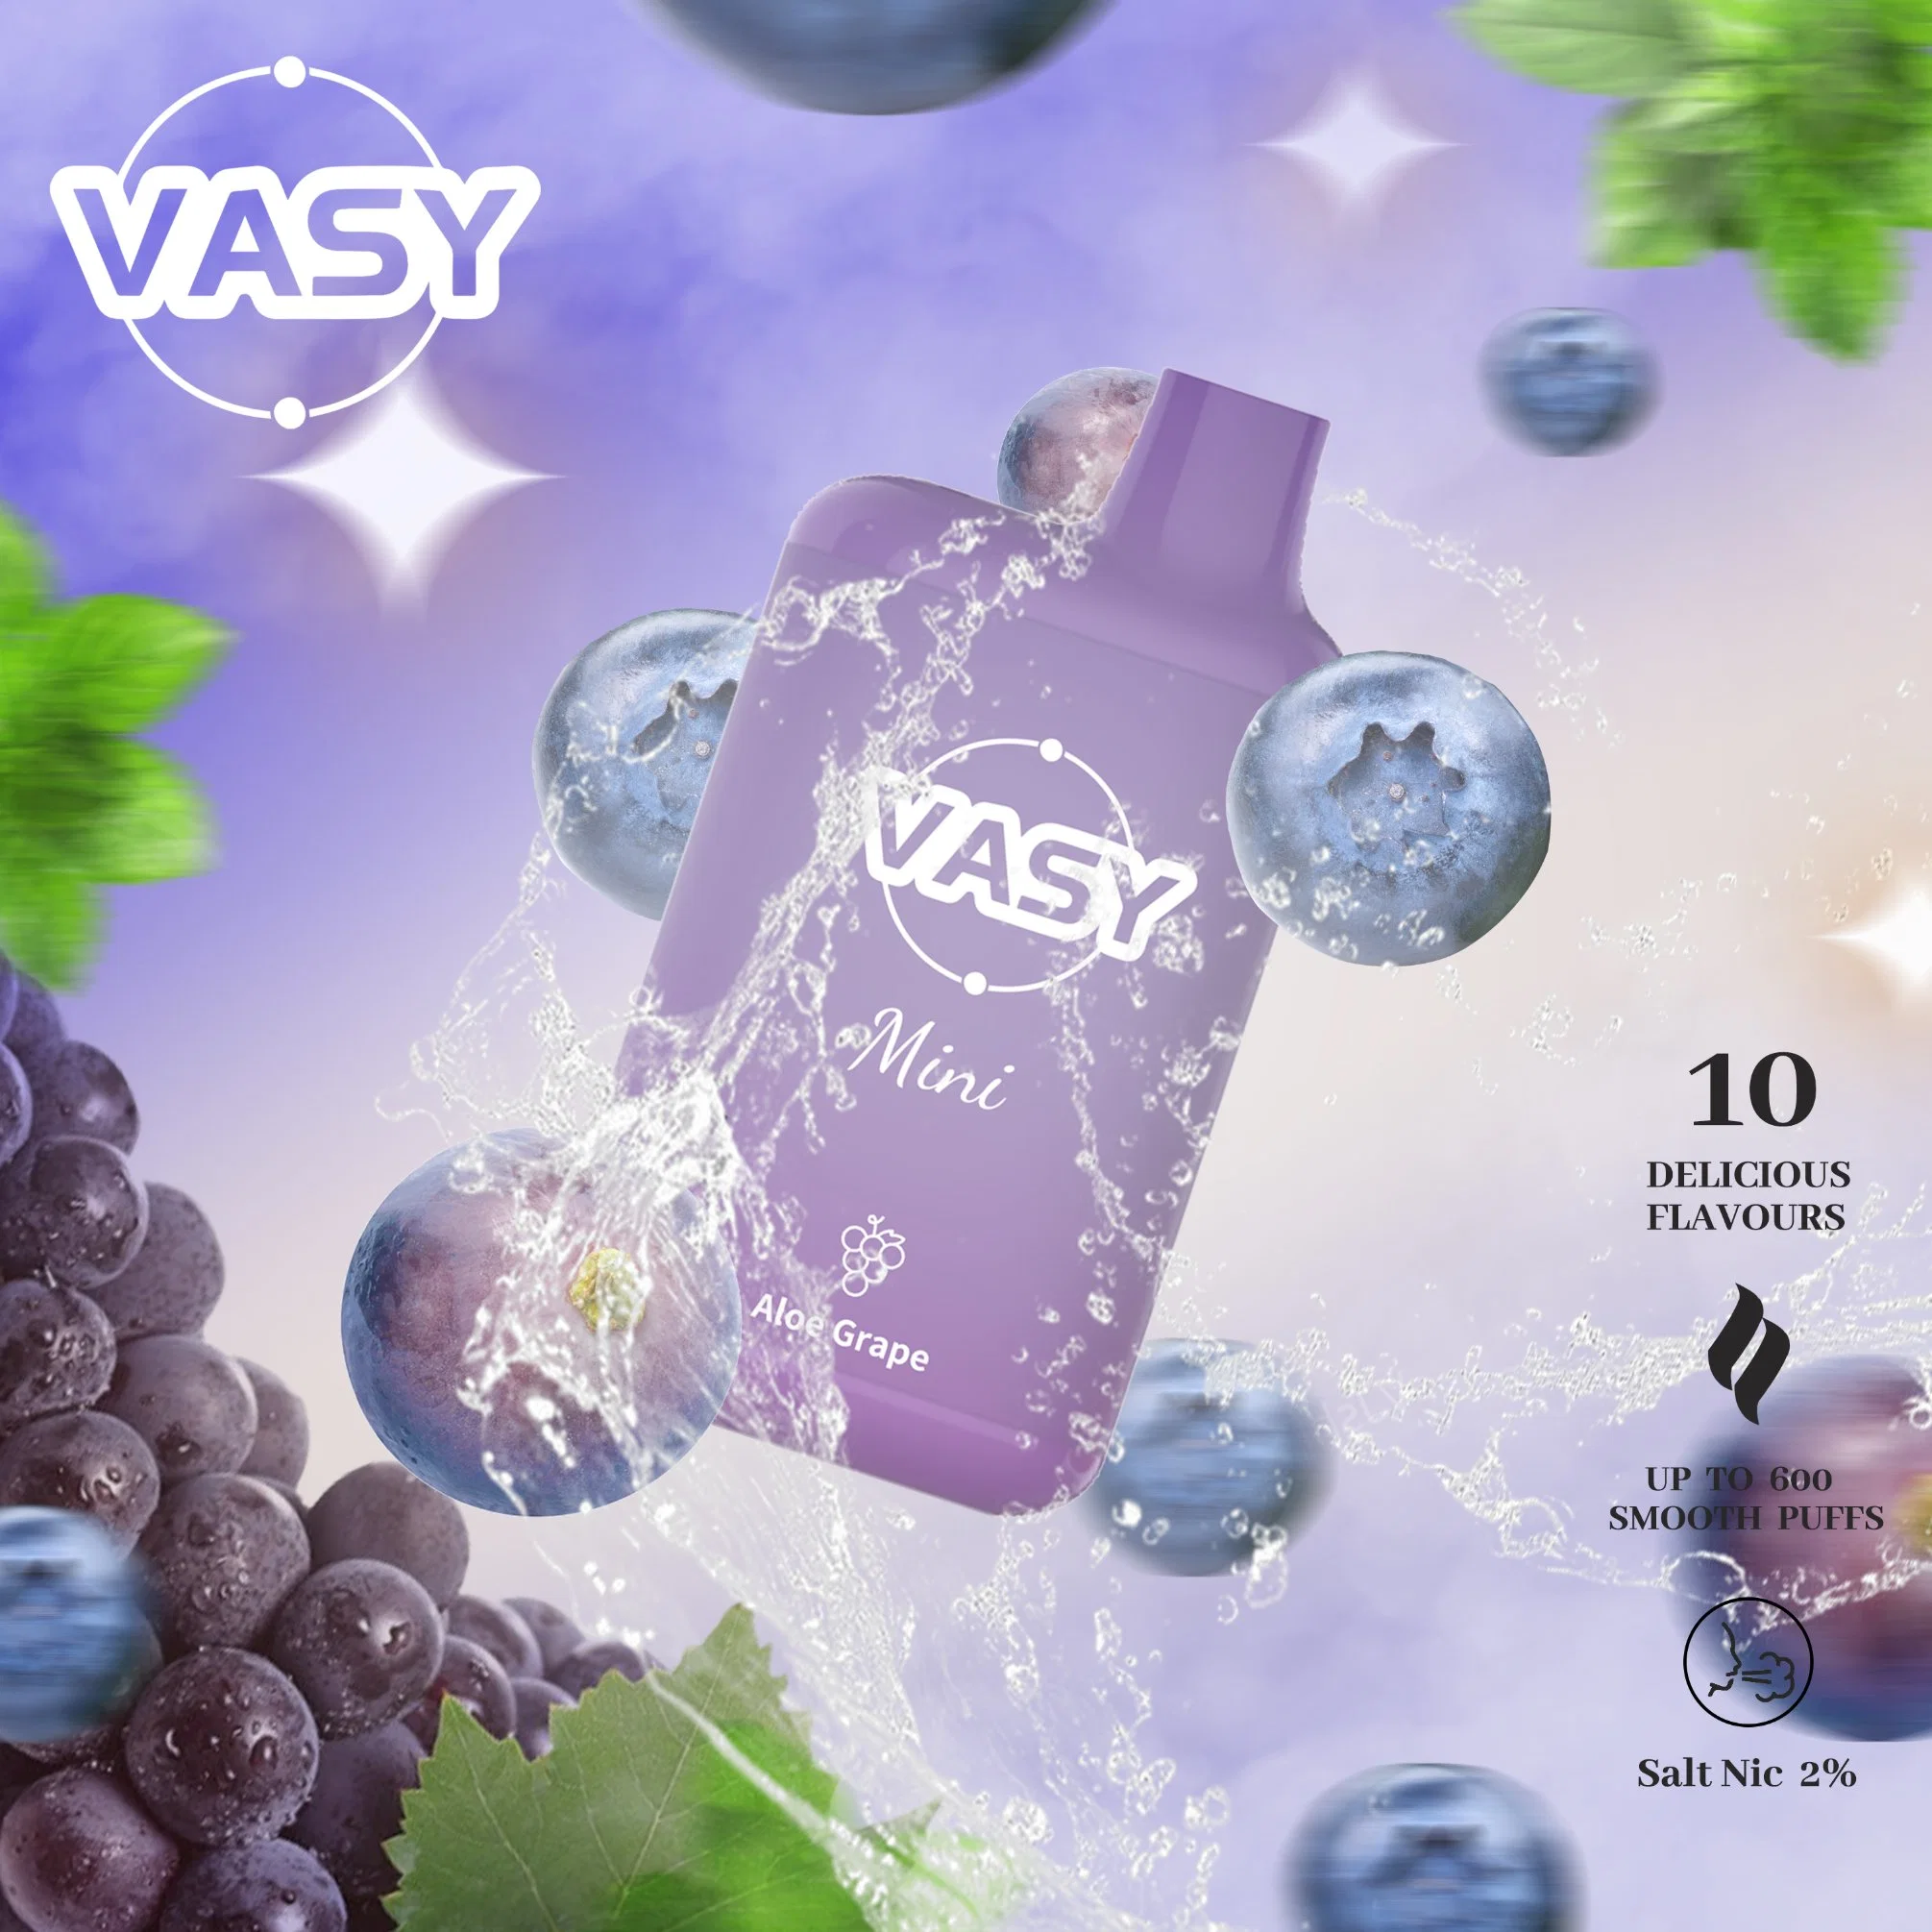 Vasy Crystal Tpd Compliance 600 Puffs Wholesale/Supplier Cheap Vape 20mg Nic Disposable/Chargeable Vape From Original Factory